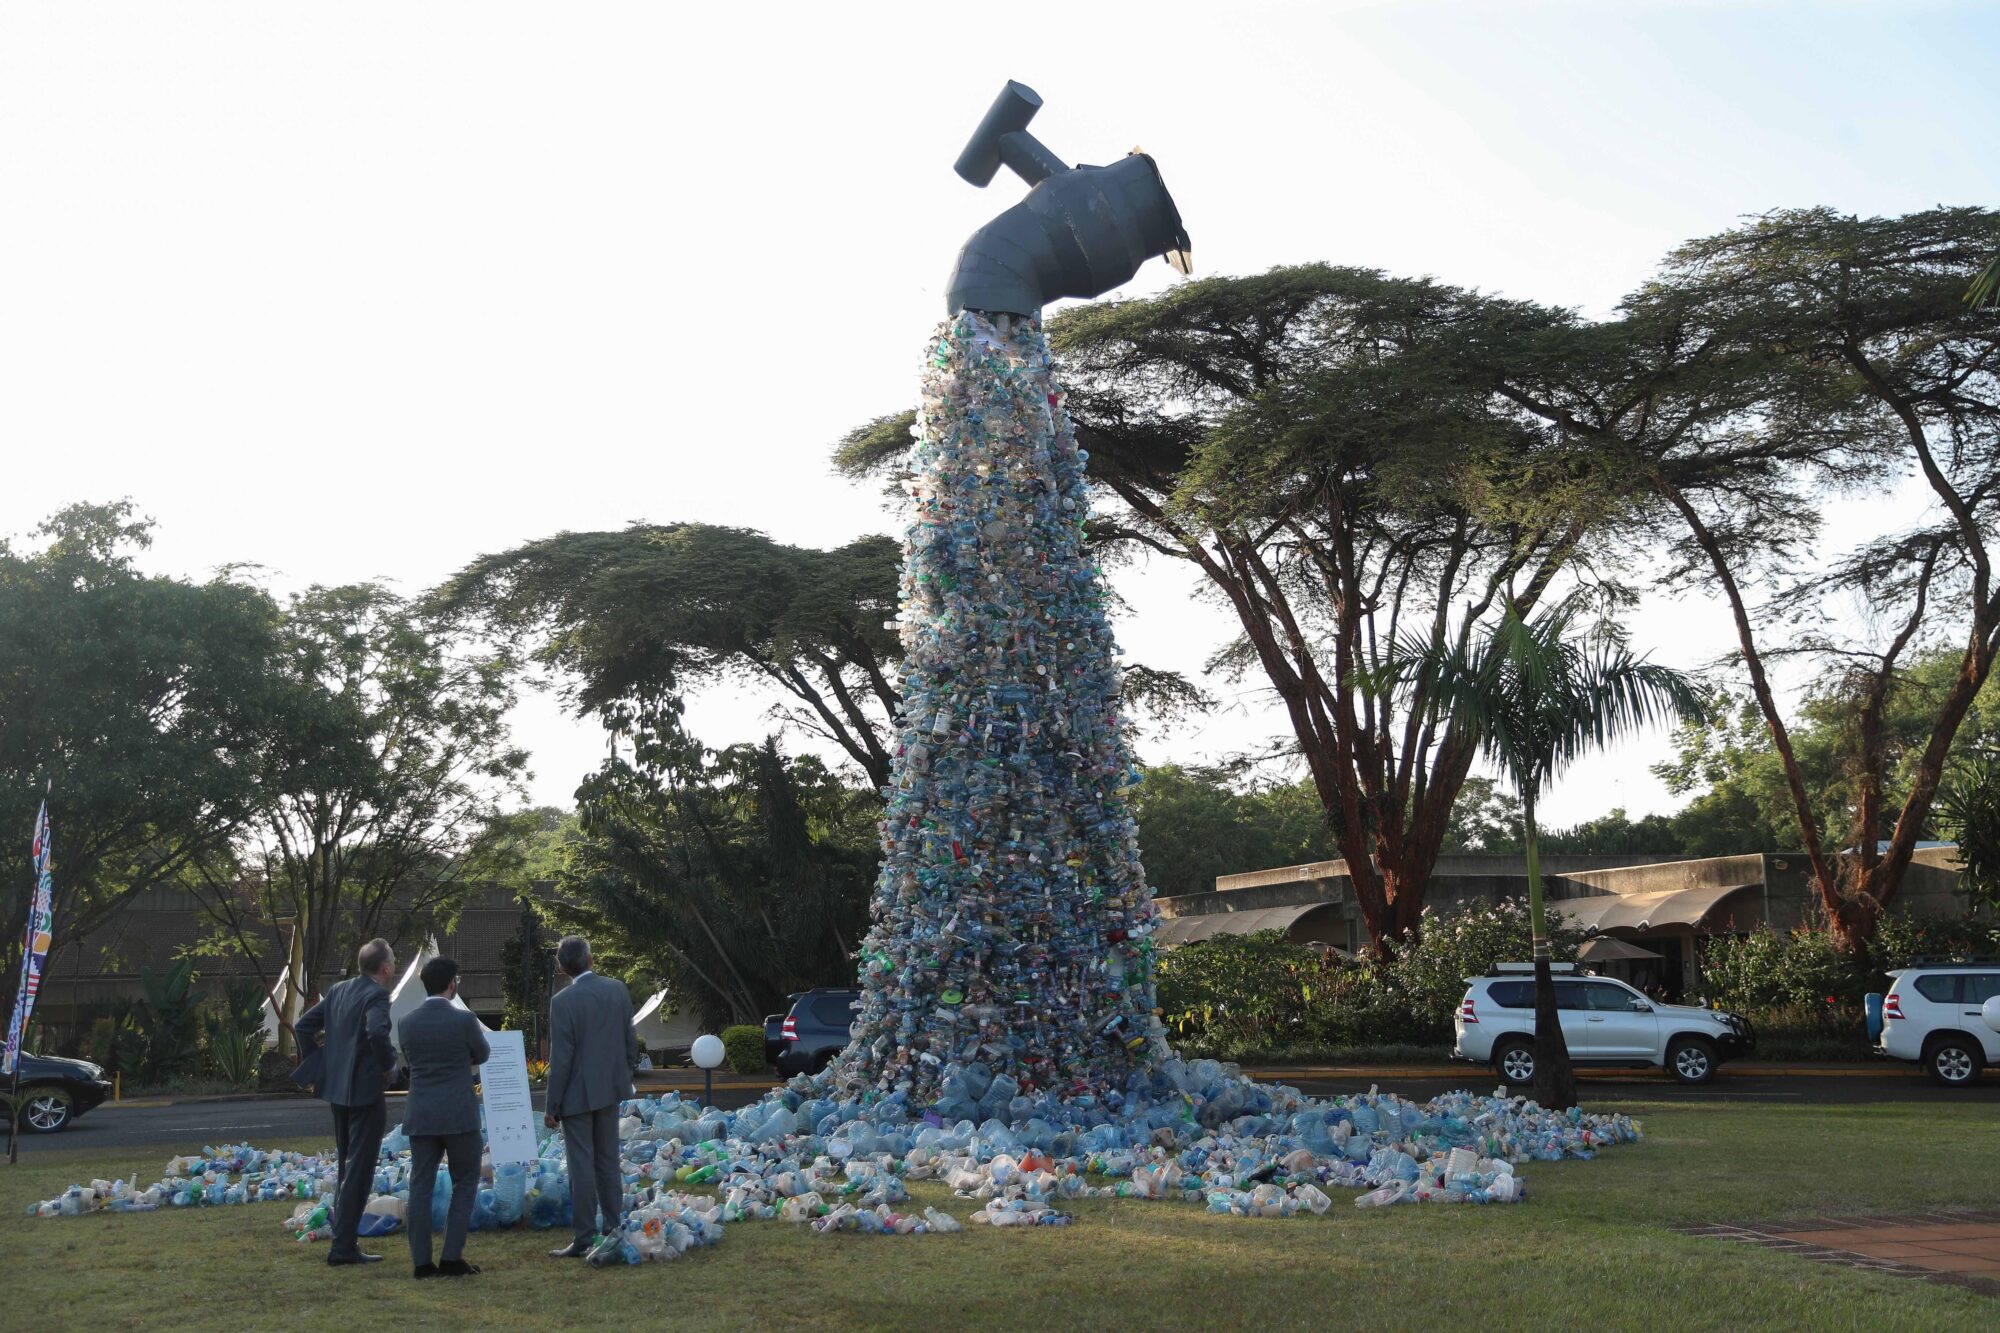 <p>An art installation depicting plastic bottles flowing from a tap at the UNEP headquarters in Nairobi, Kenya (Image: Alamy)</p>